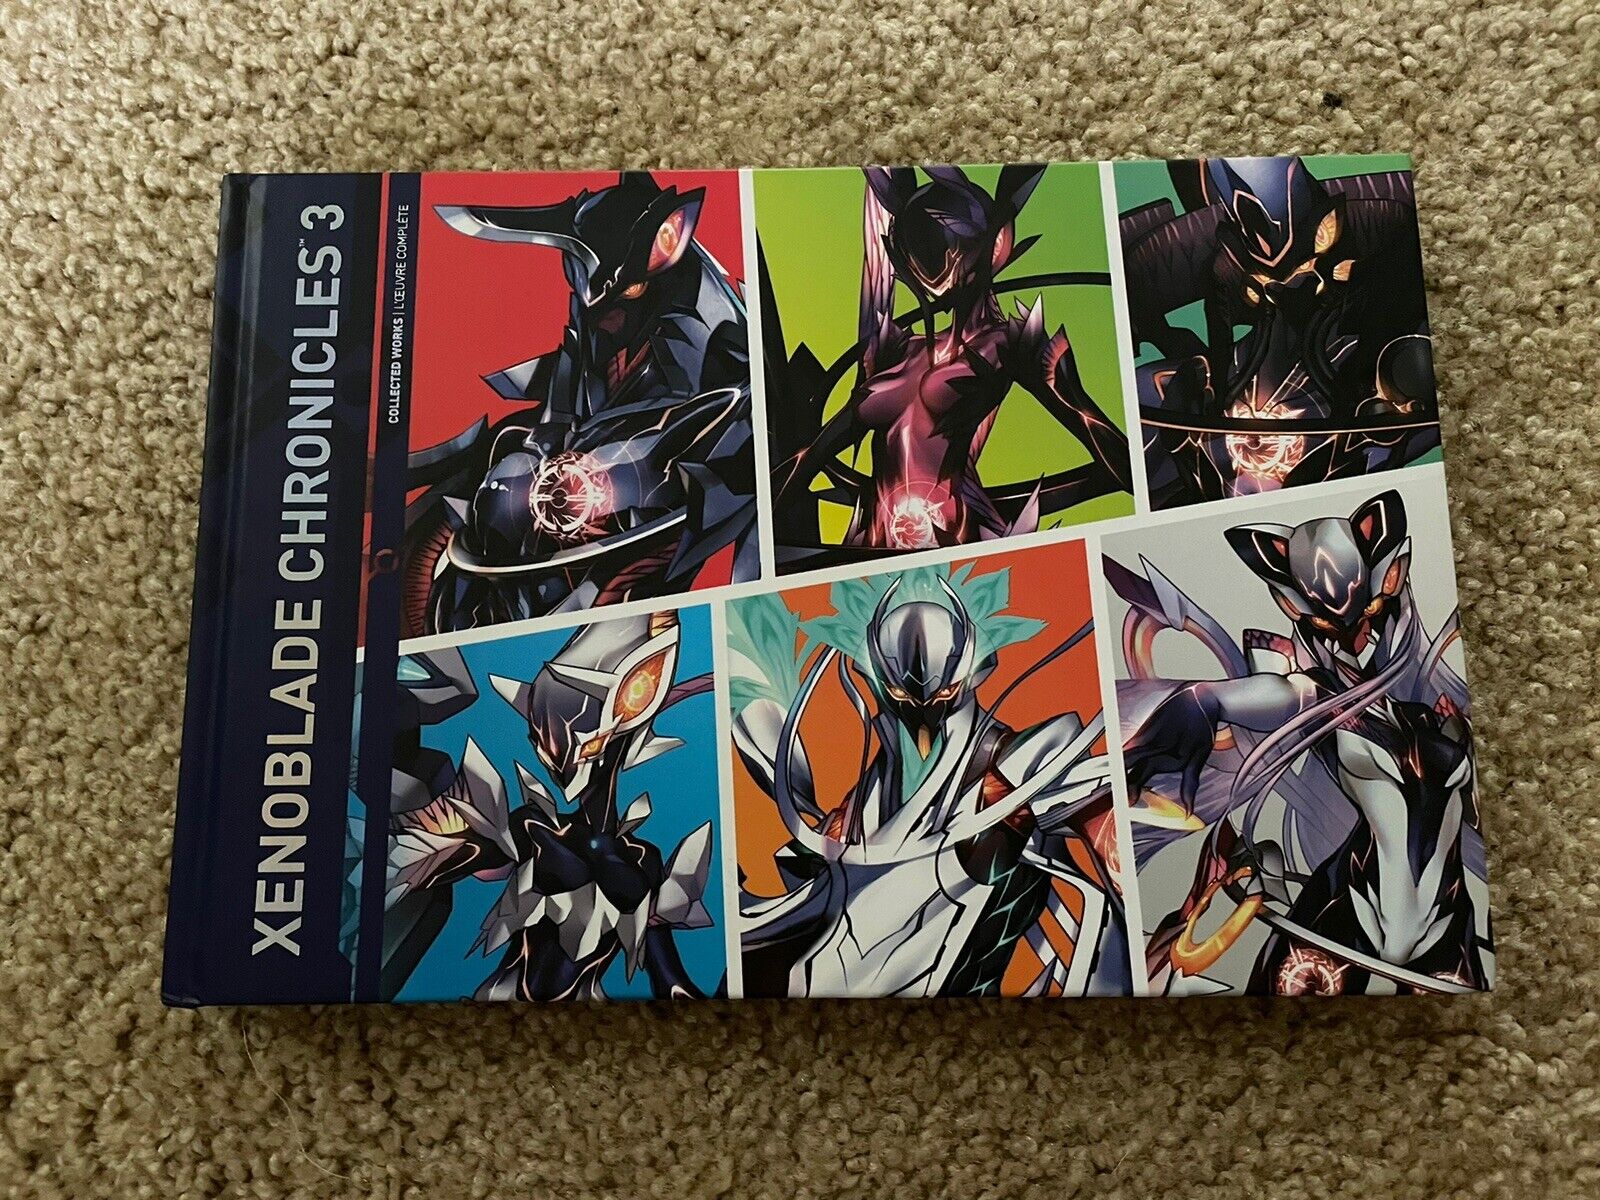 xenoblade chronicles 3 collected works